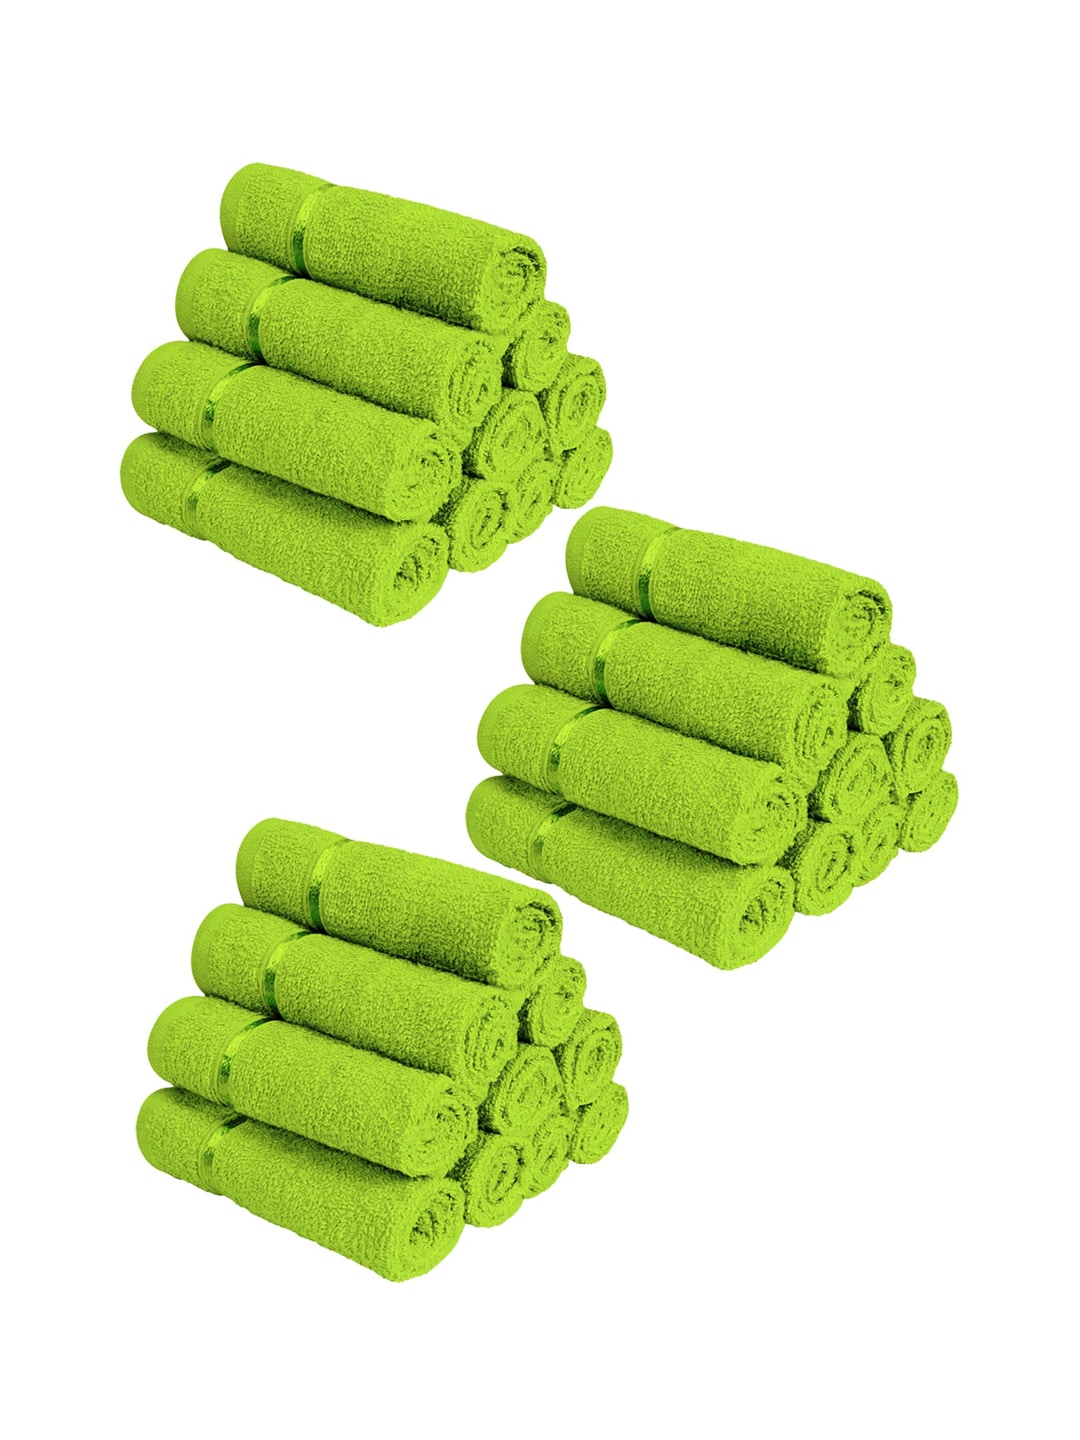 Story@home Set Of 30 Green Solid 450 GSM Pure Cotton Face Towels Price in India